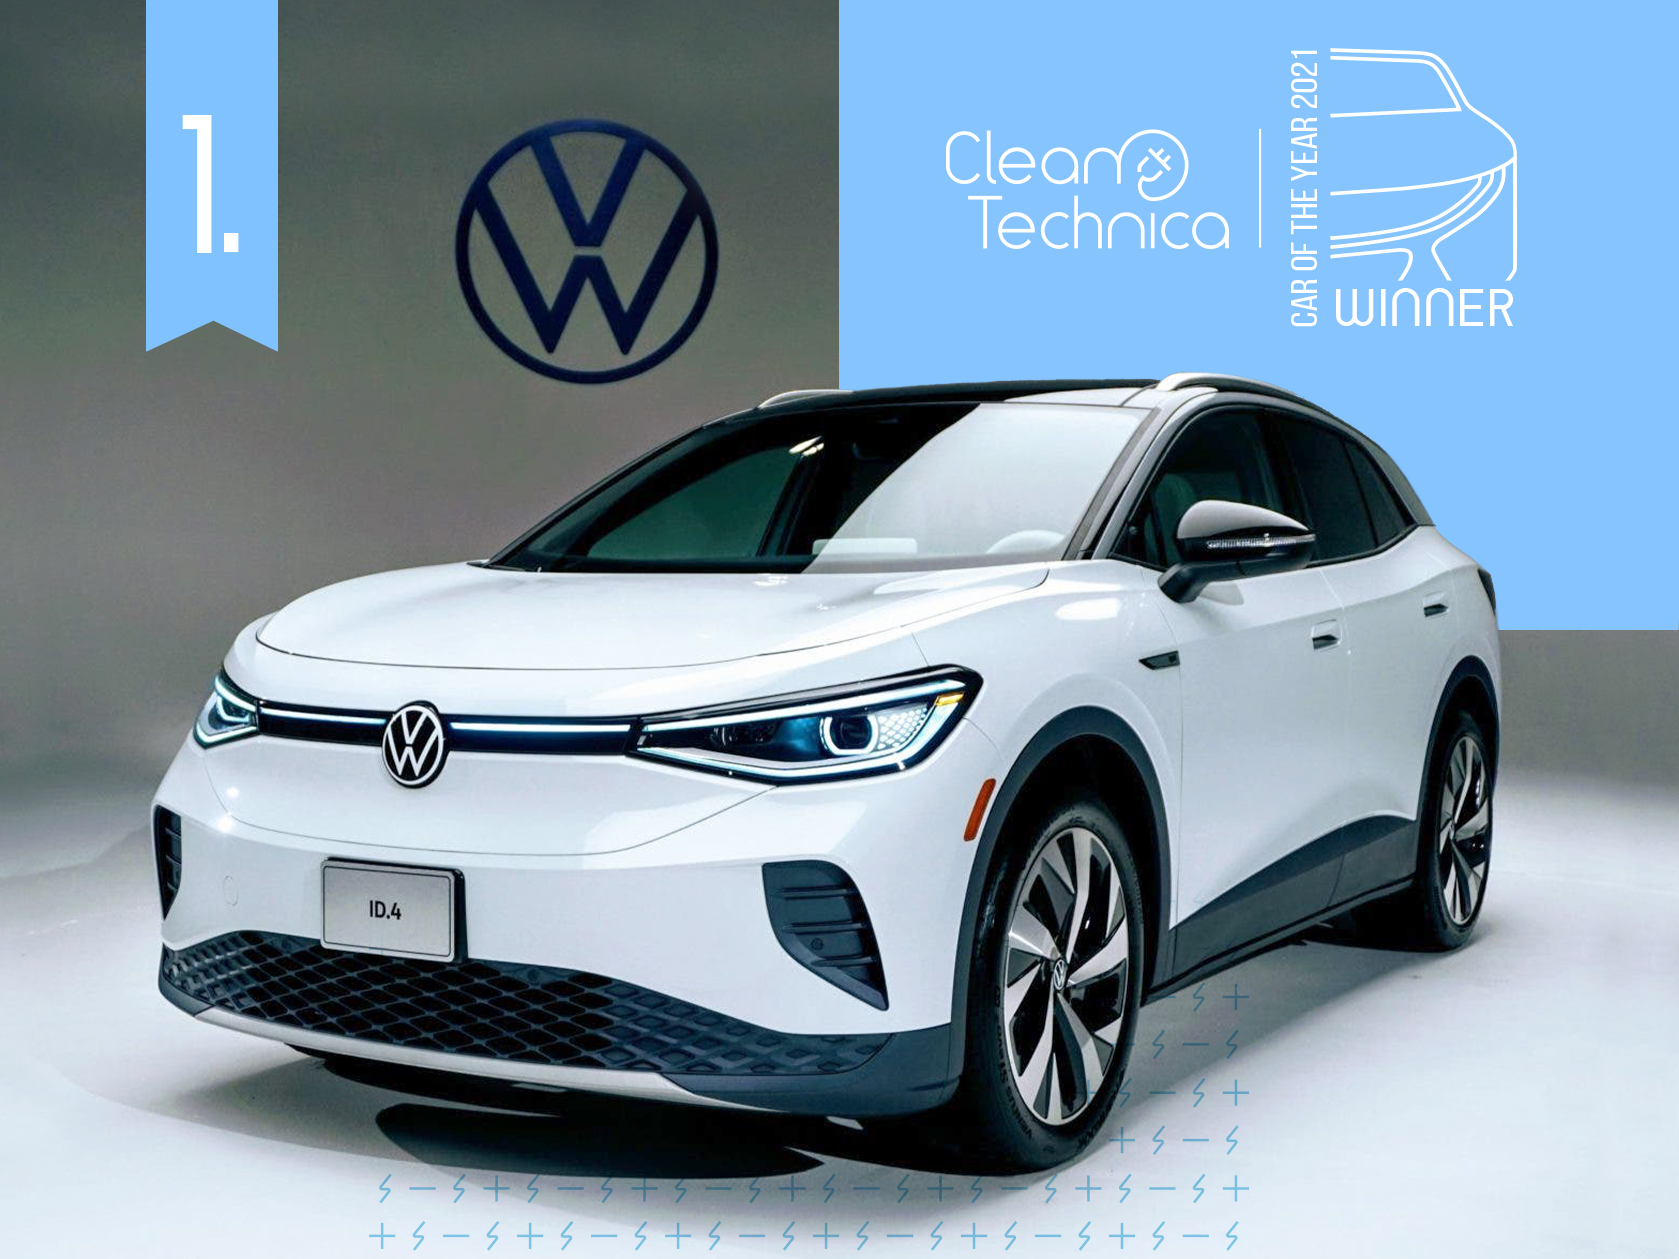 2023 Volkswagen Group Electrical Automotive Deliveries Up 34% Over 2022 Unveiled: Uncover Auto Excellence at Autoxyon